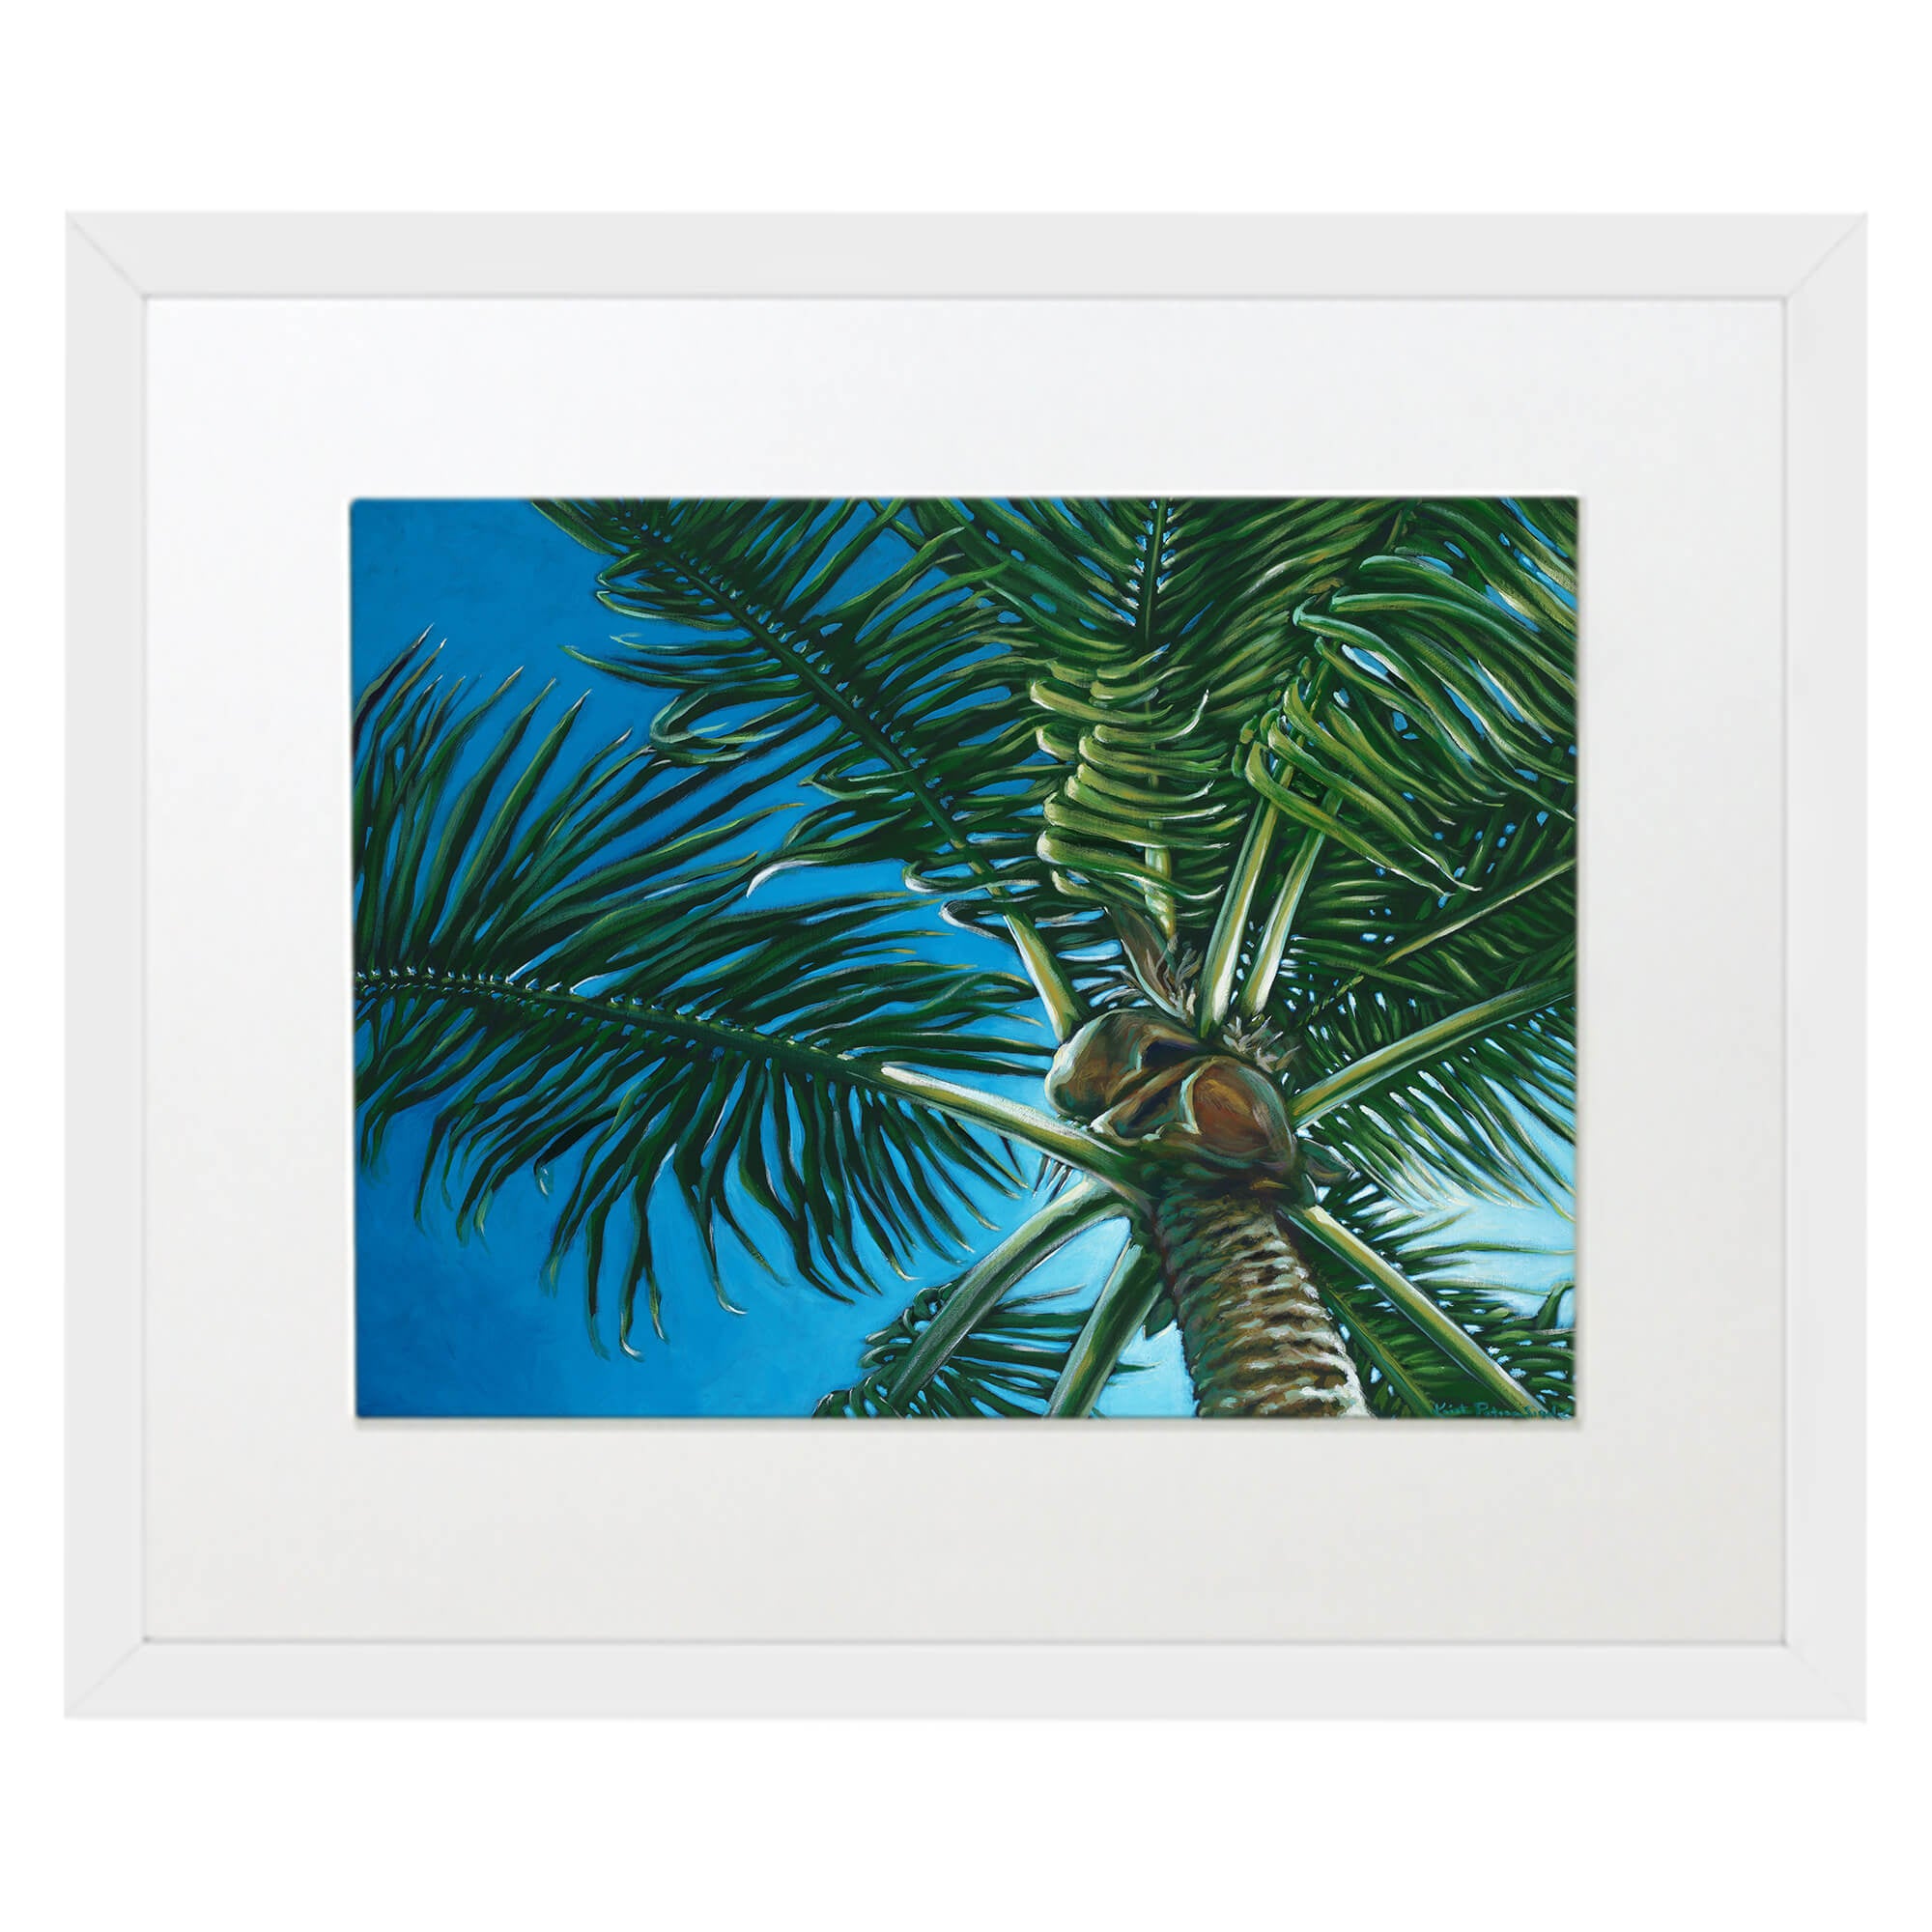 Matted art print with white frame featuring a brown coconut by hawaii artist Kristi Petosa